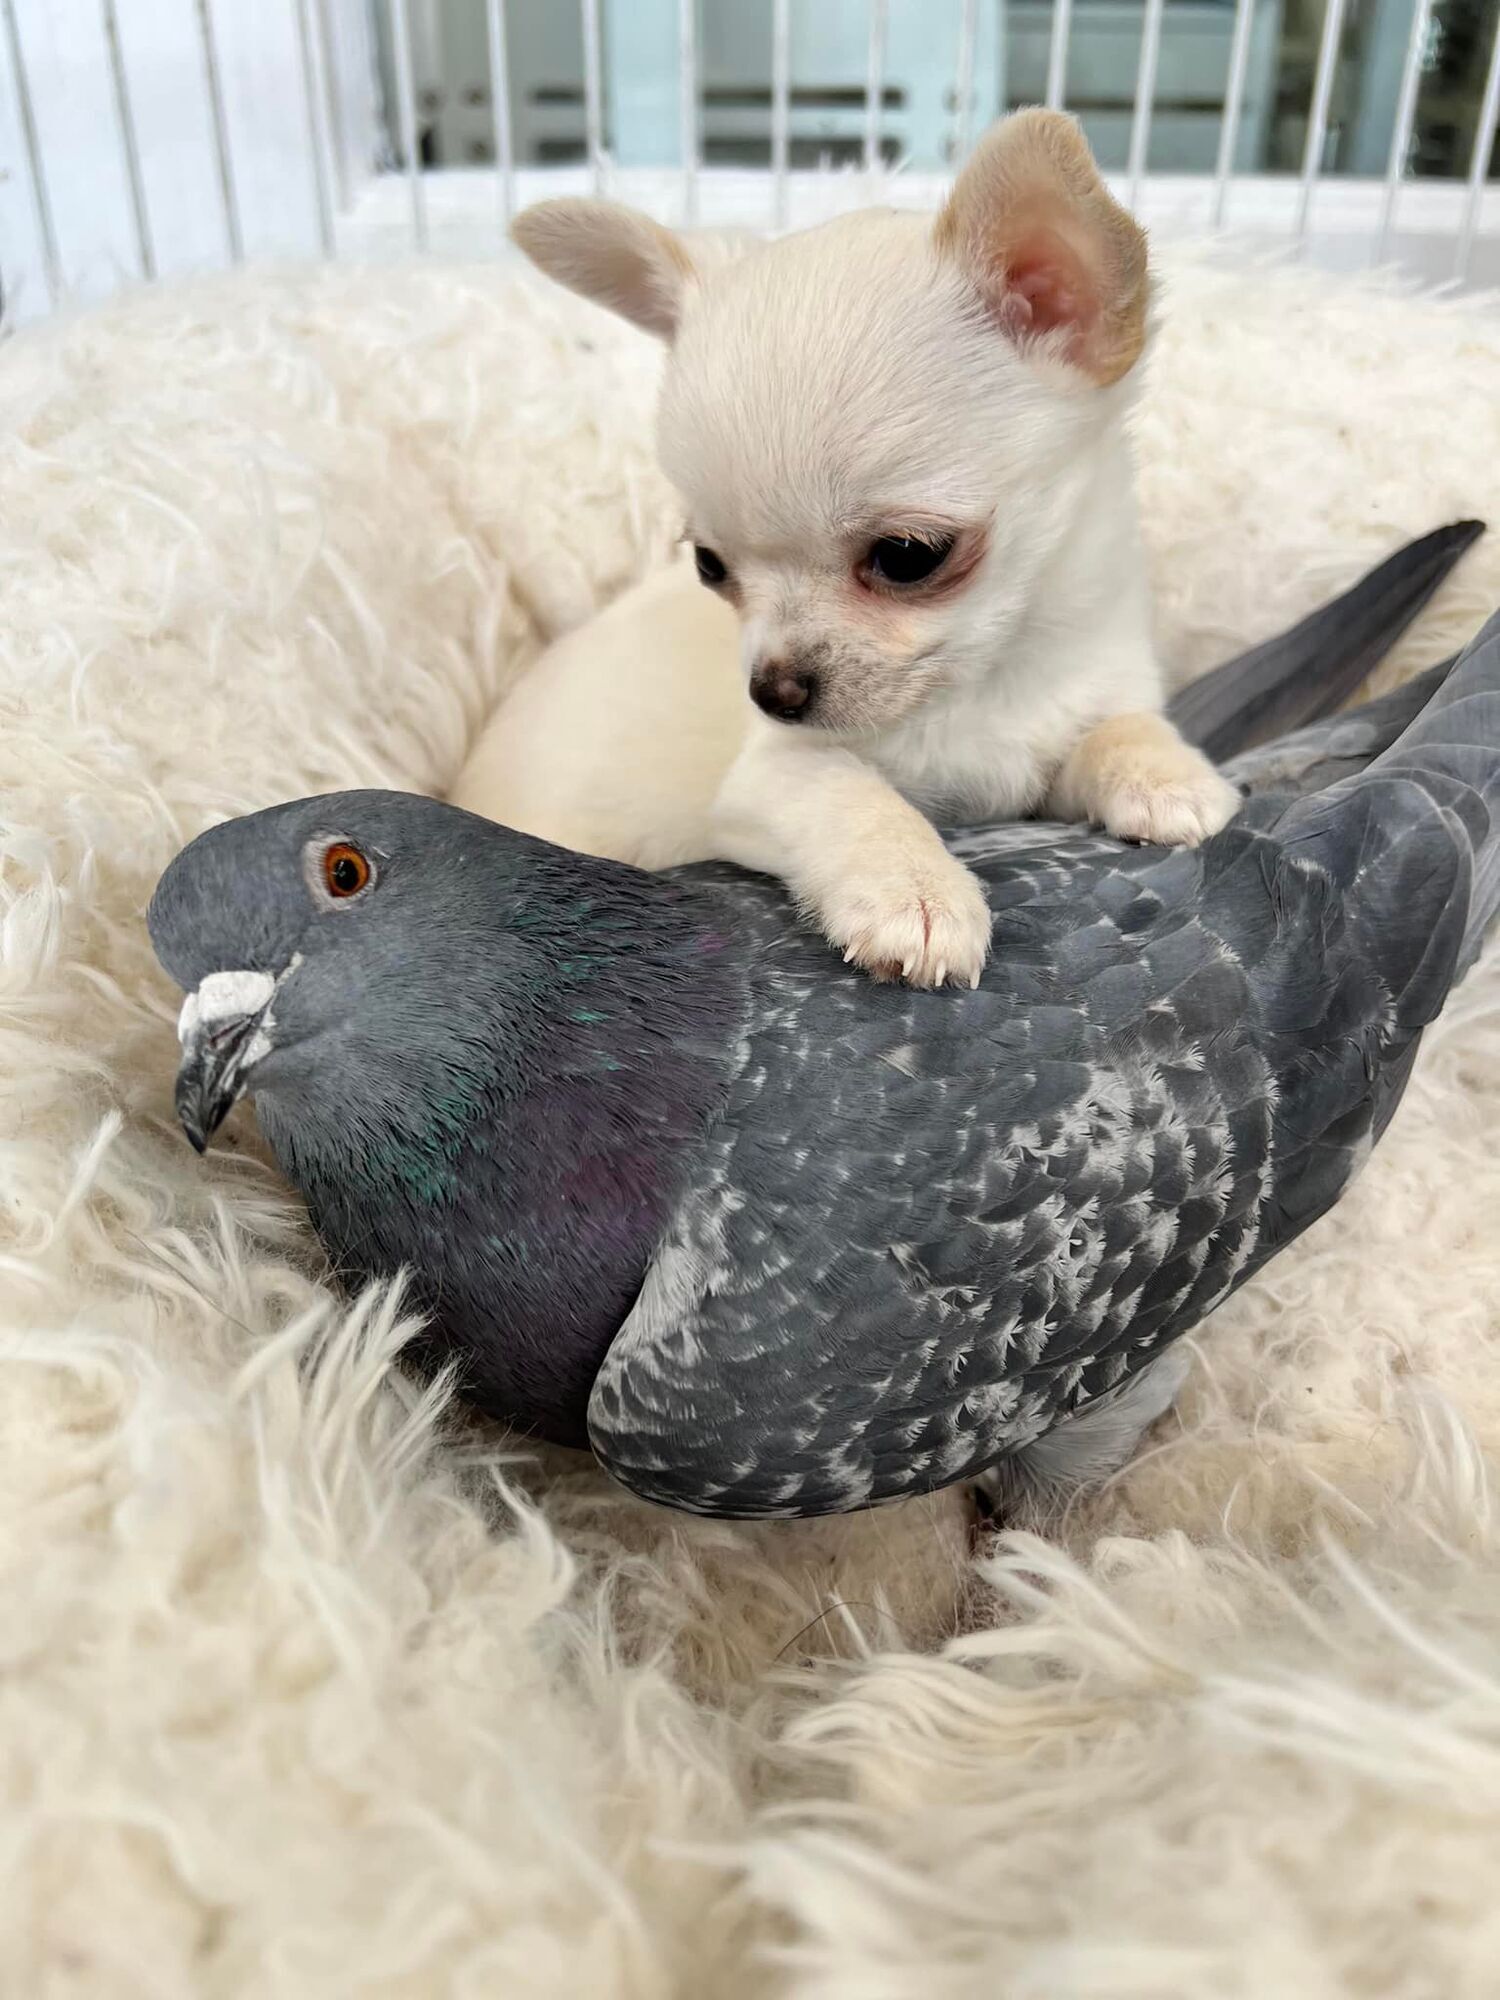 A pigeon that can't fly makes friends with a puppy that can't walk (cute photos)